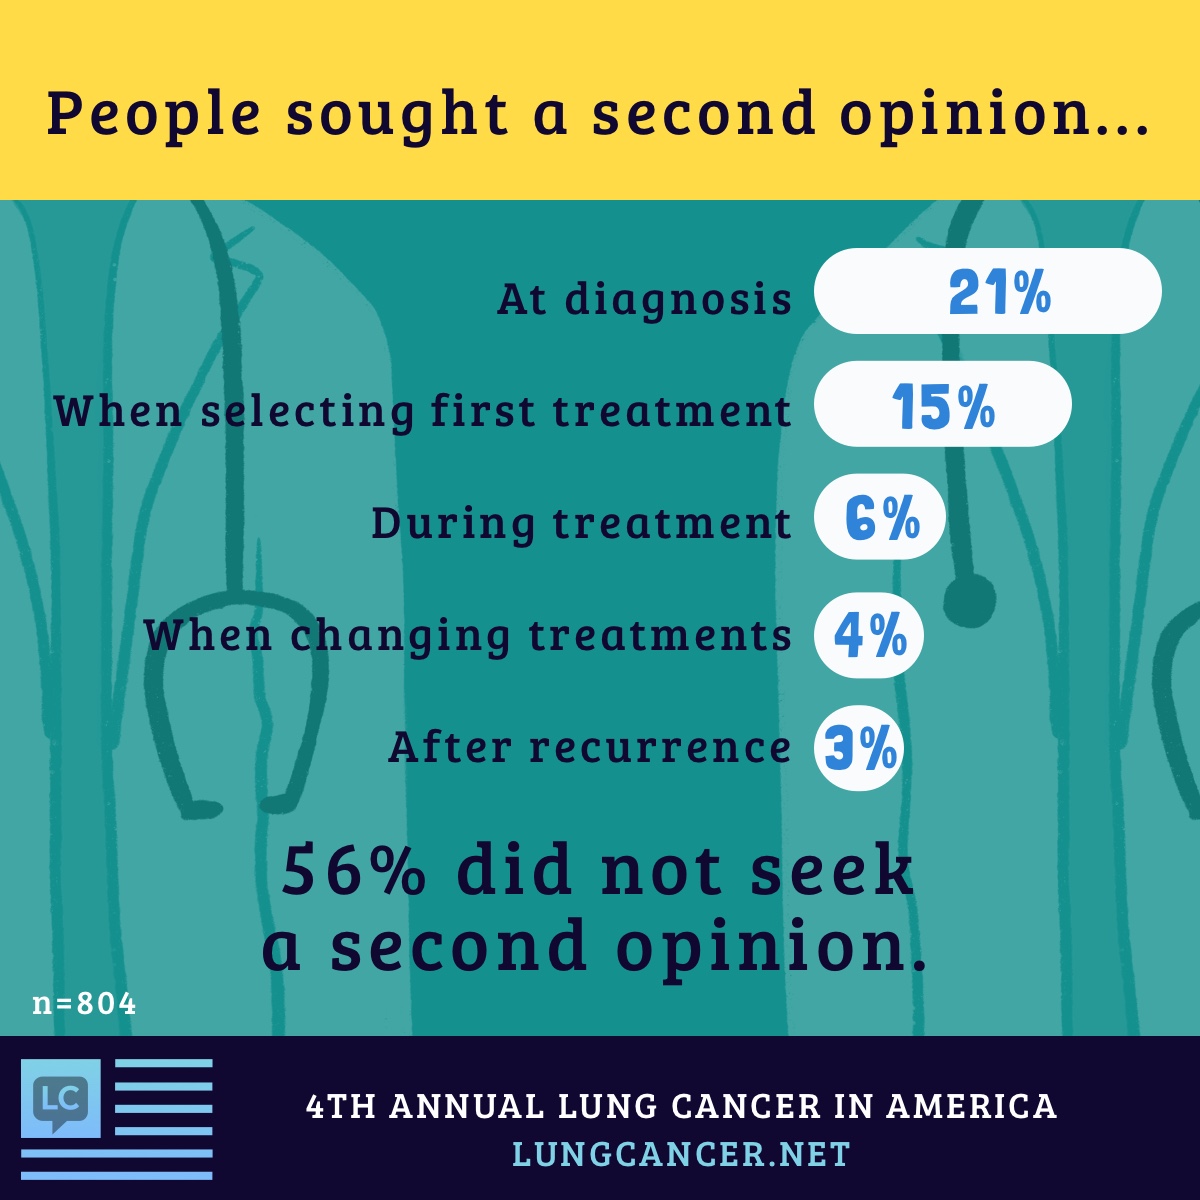 People sought a second opinion at diagnosis 21%, when selecting first treatment 15%, during treatment 6%, when changing treatments 4%, after recurrence 3%. 56% did not seek a second opinion.